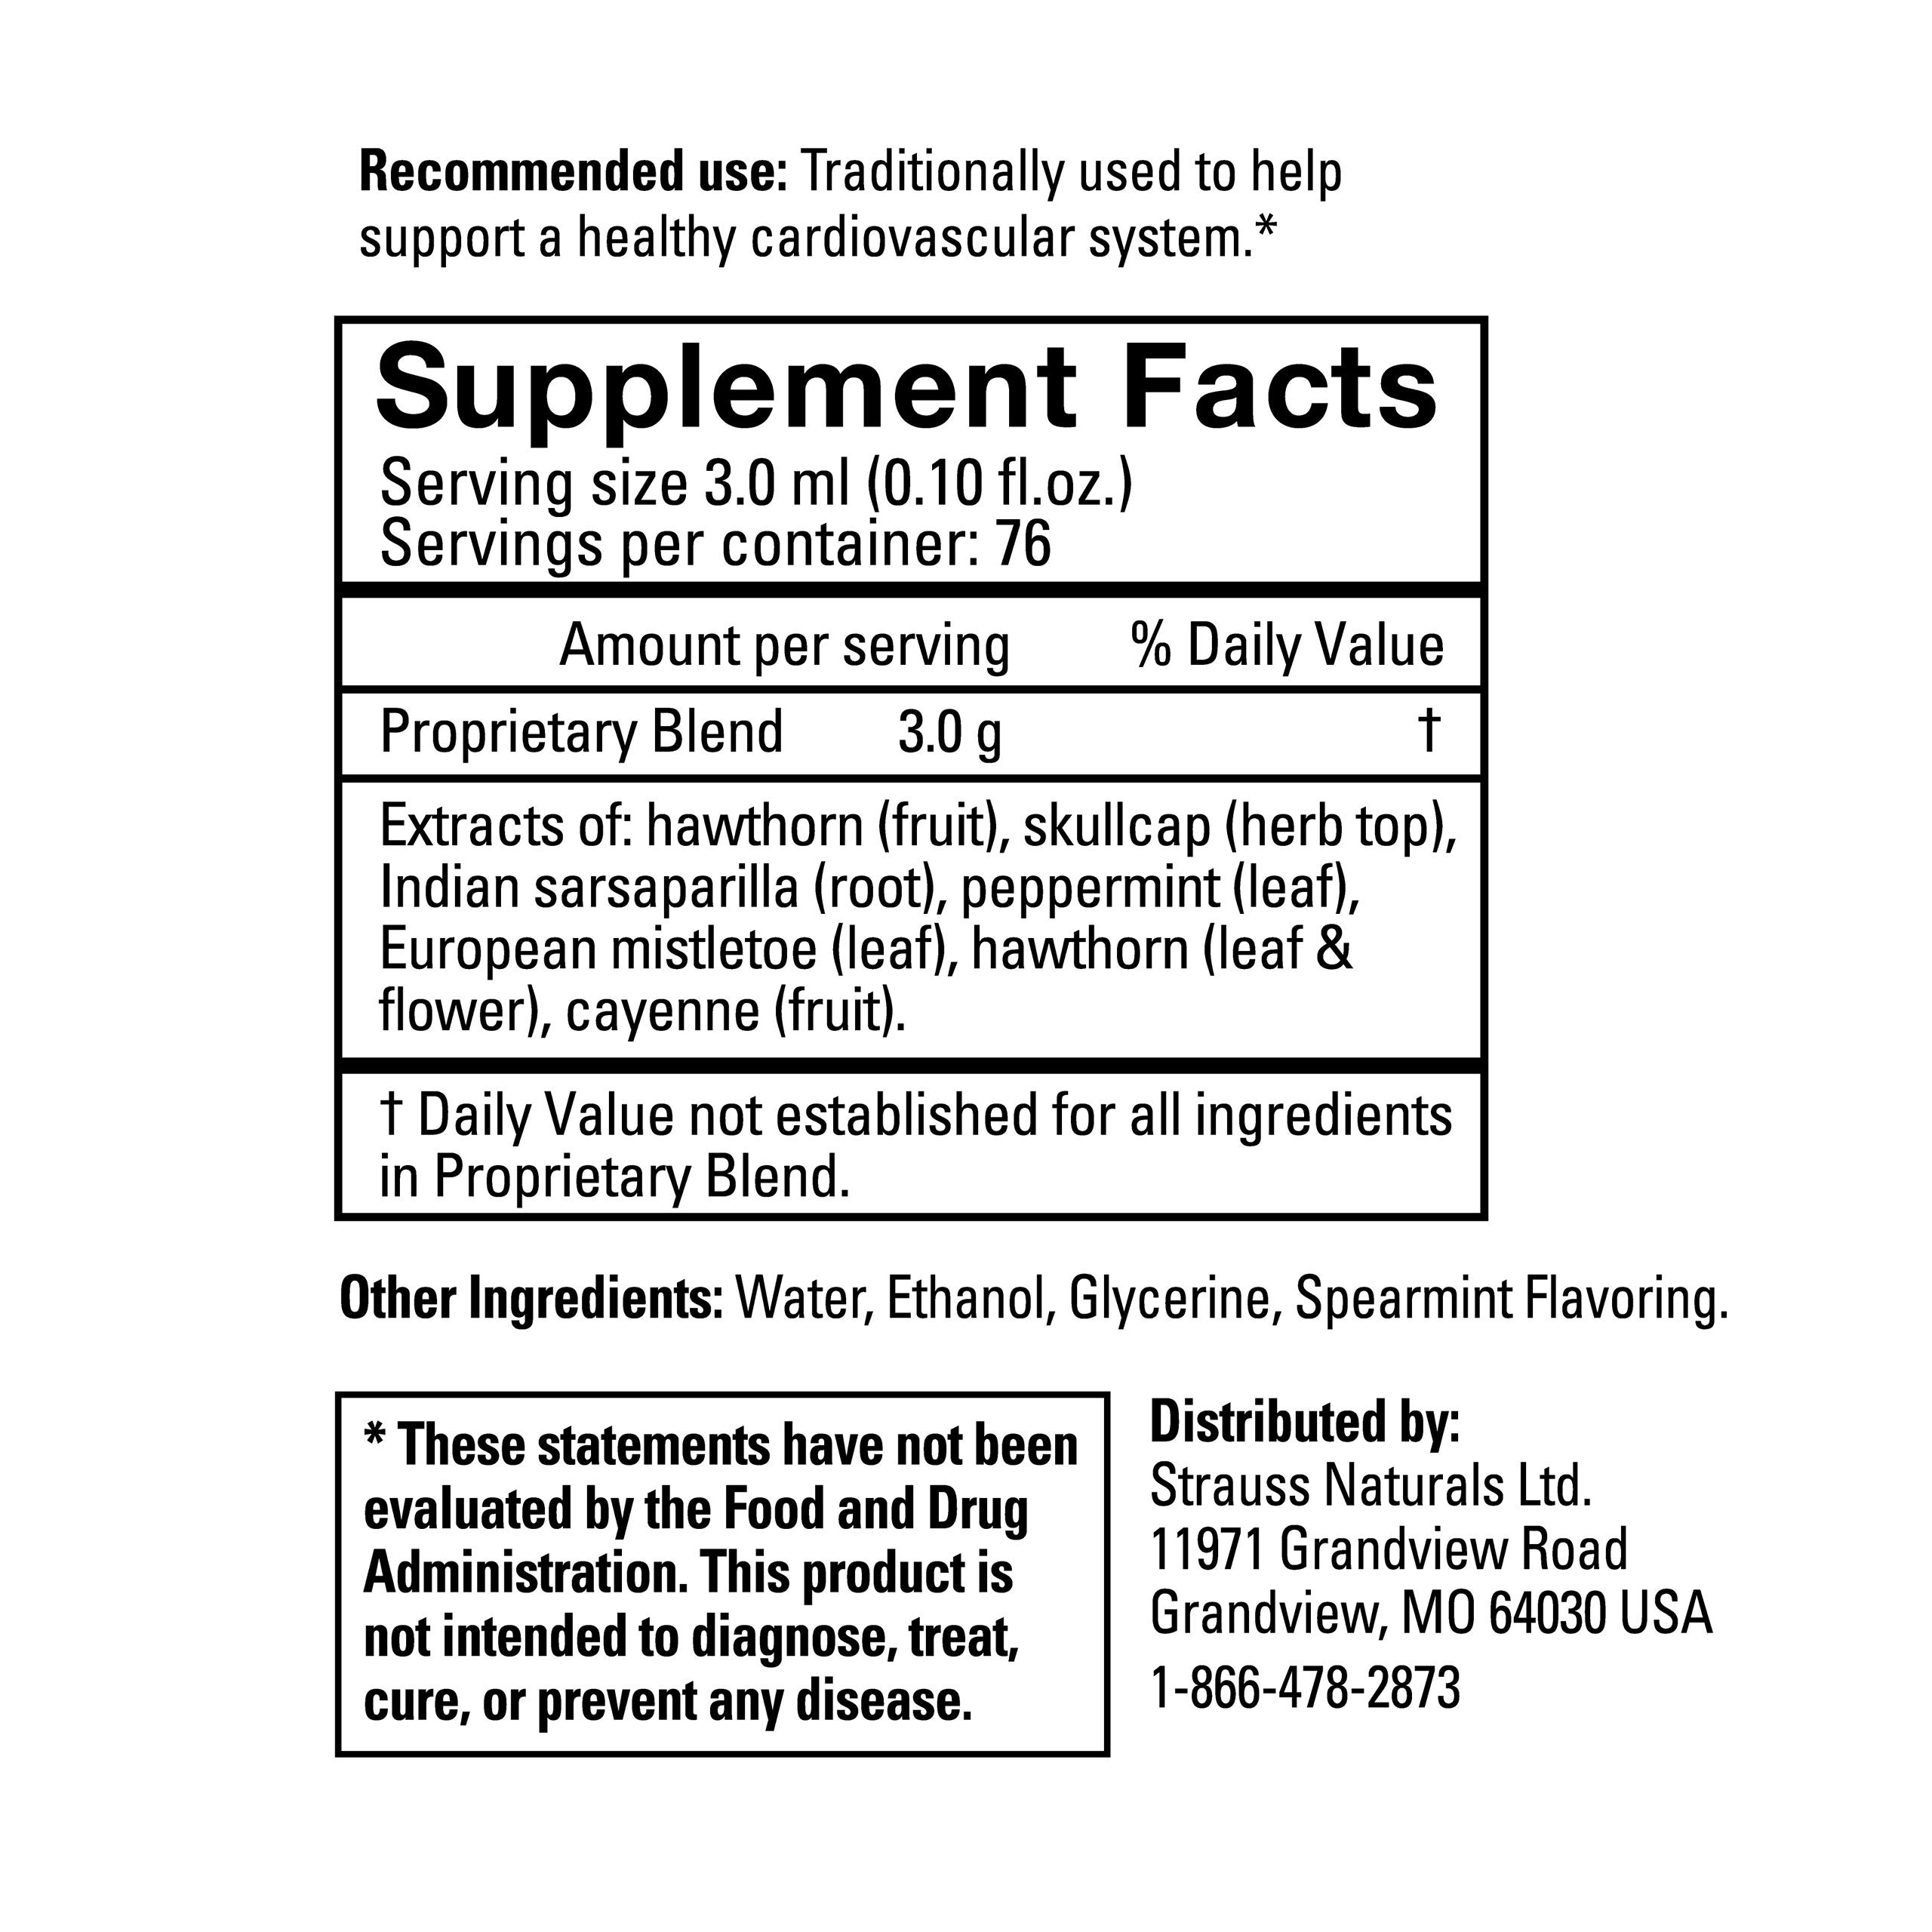 Strauss Naturals Cardio Support Drops, Natural Herbal Supplement to Support The Cardiovascular System, Non-GMO, Gluten-Free, Soy Free, 7.6 fl oz.